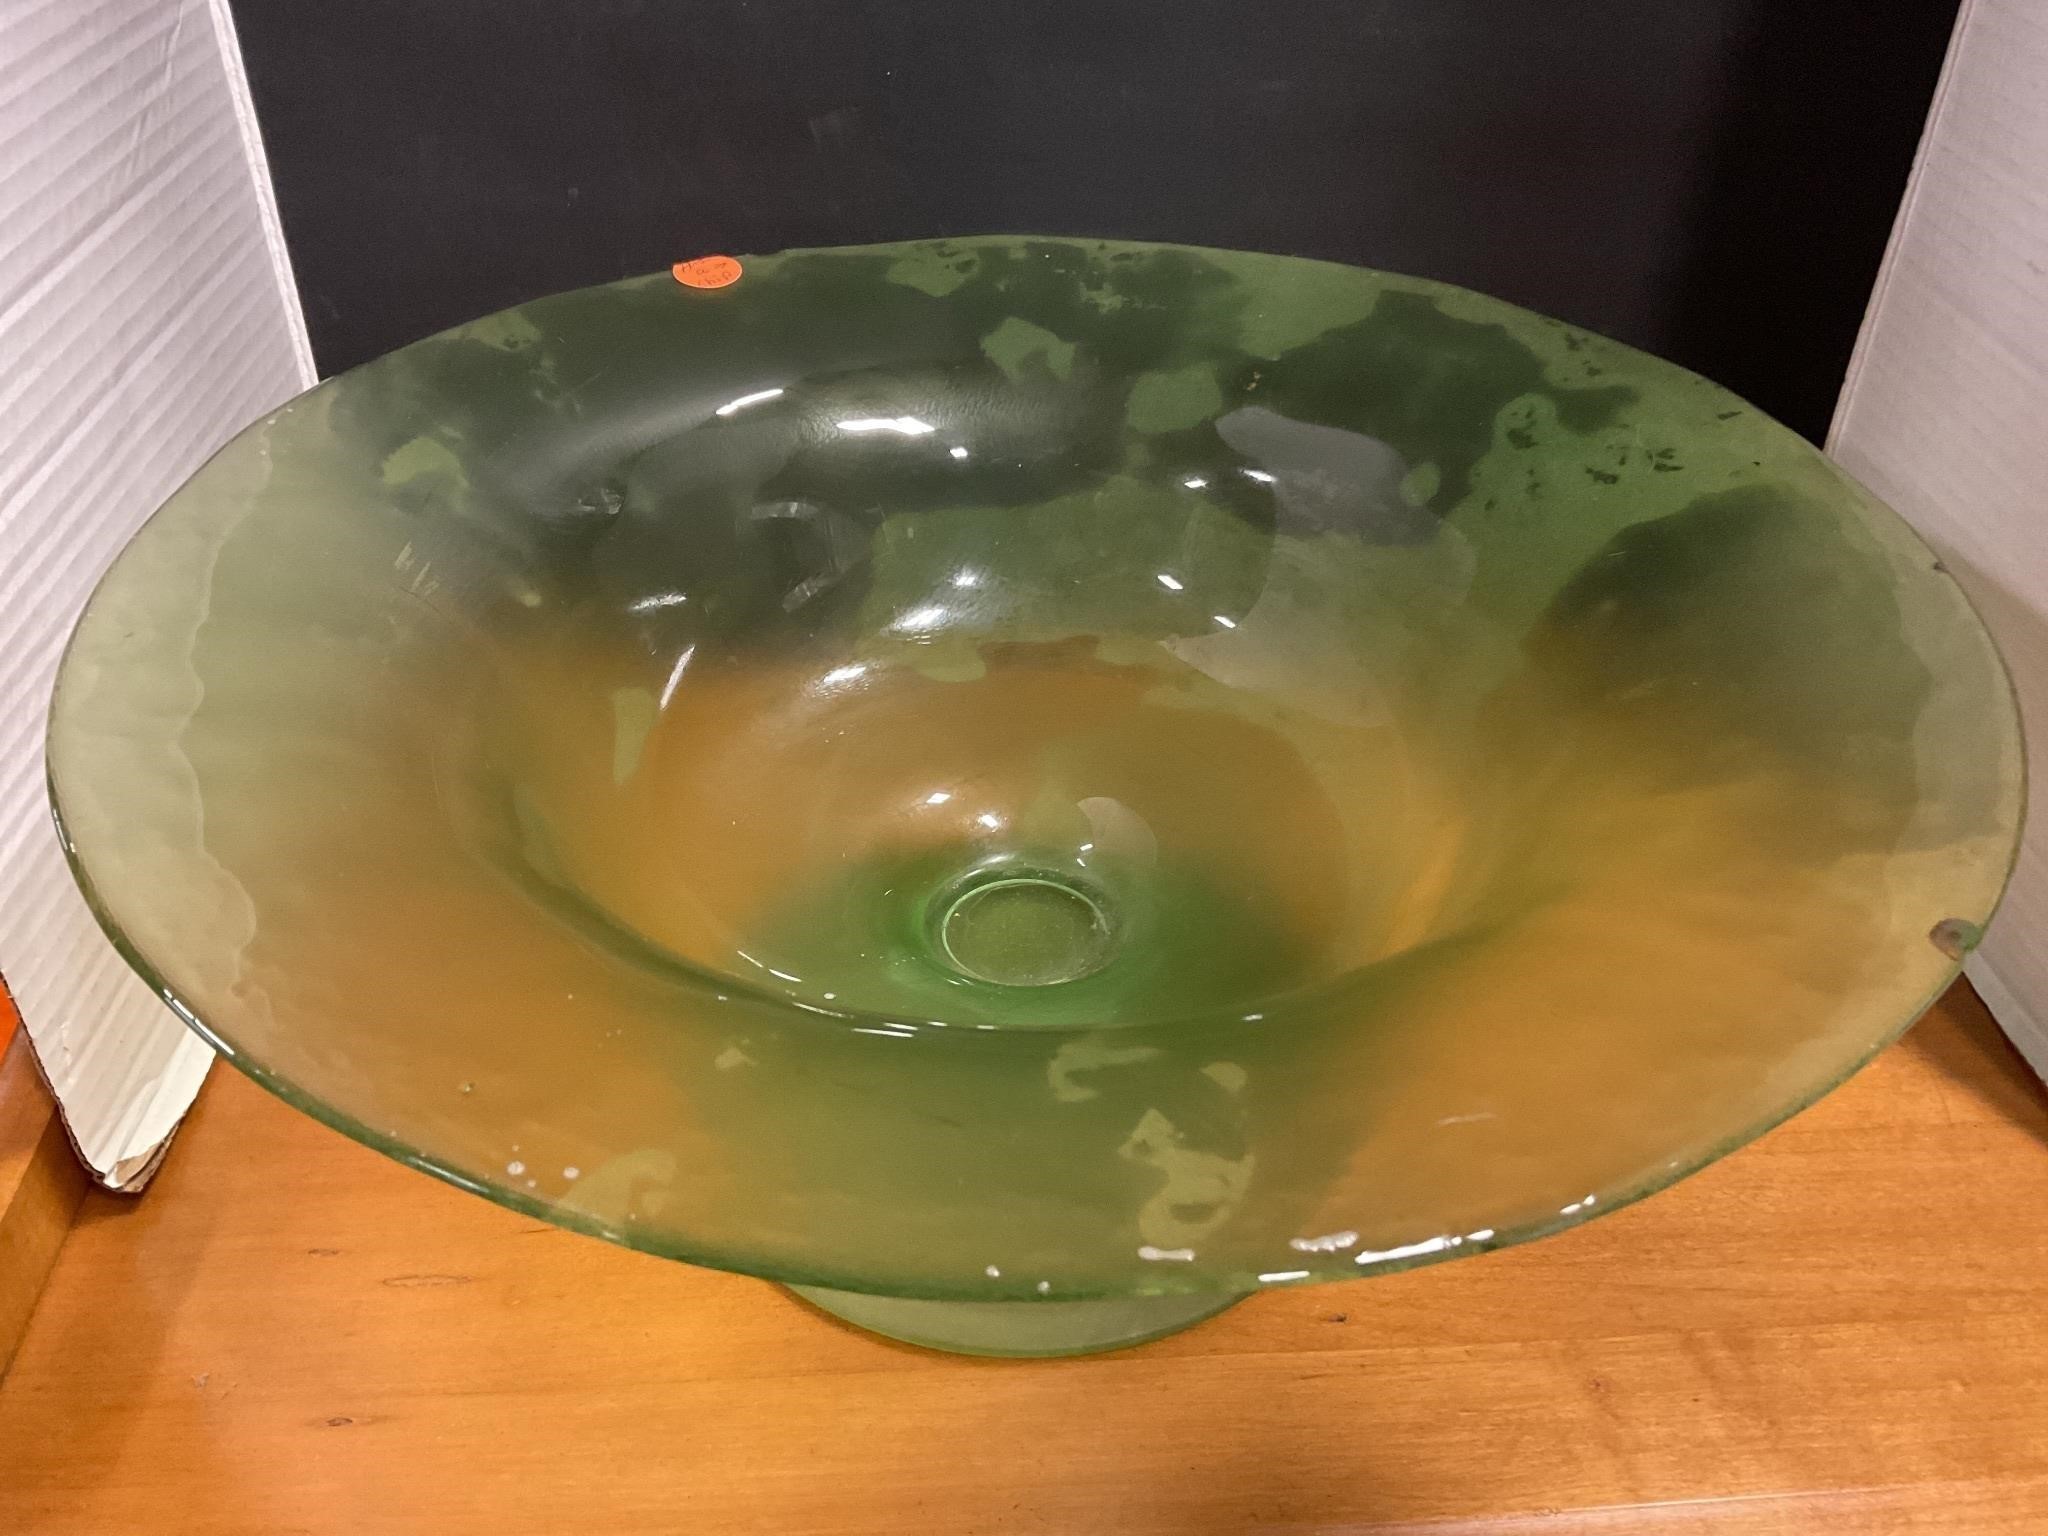 Large green bowl has a chip